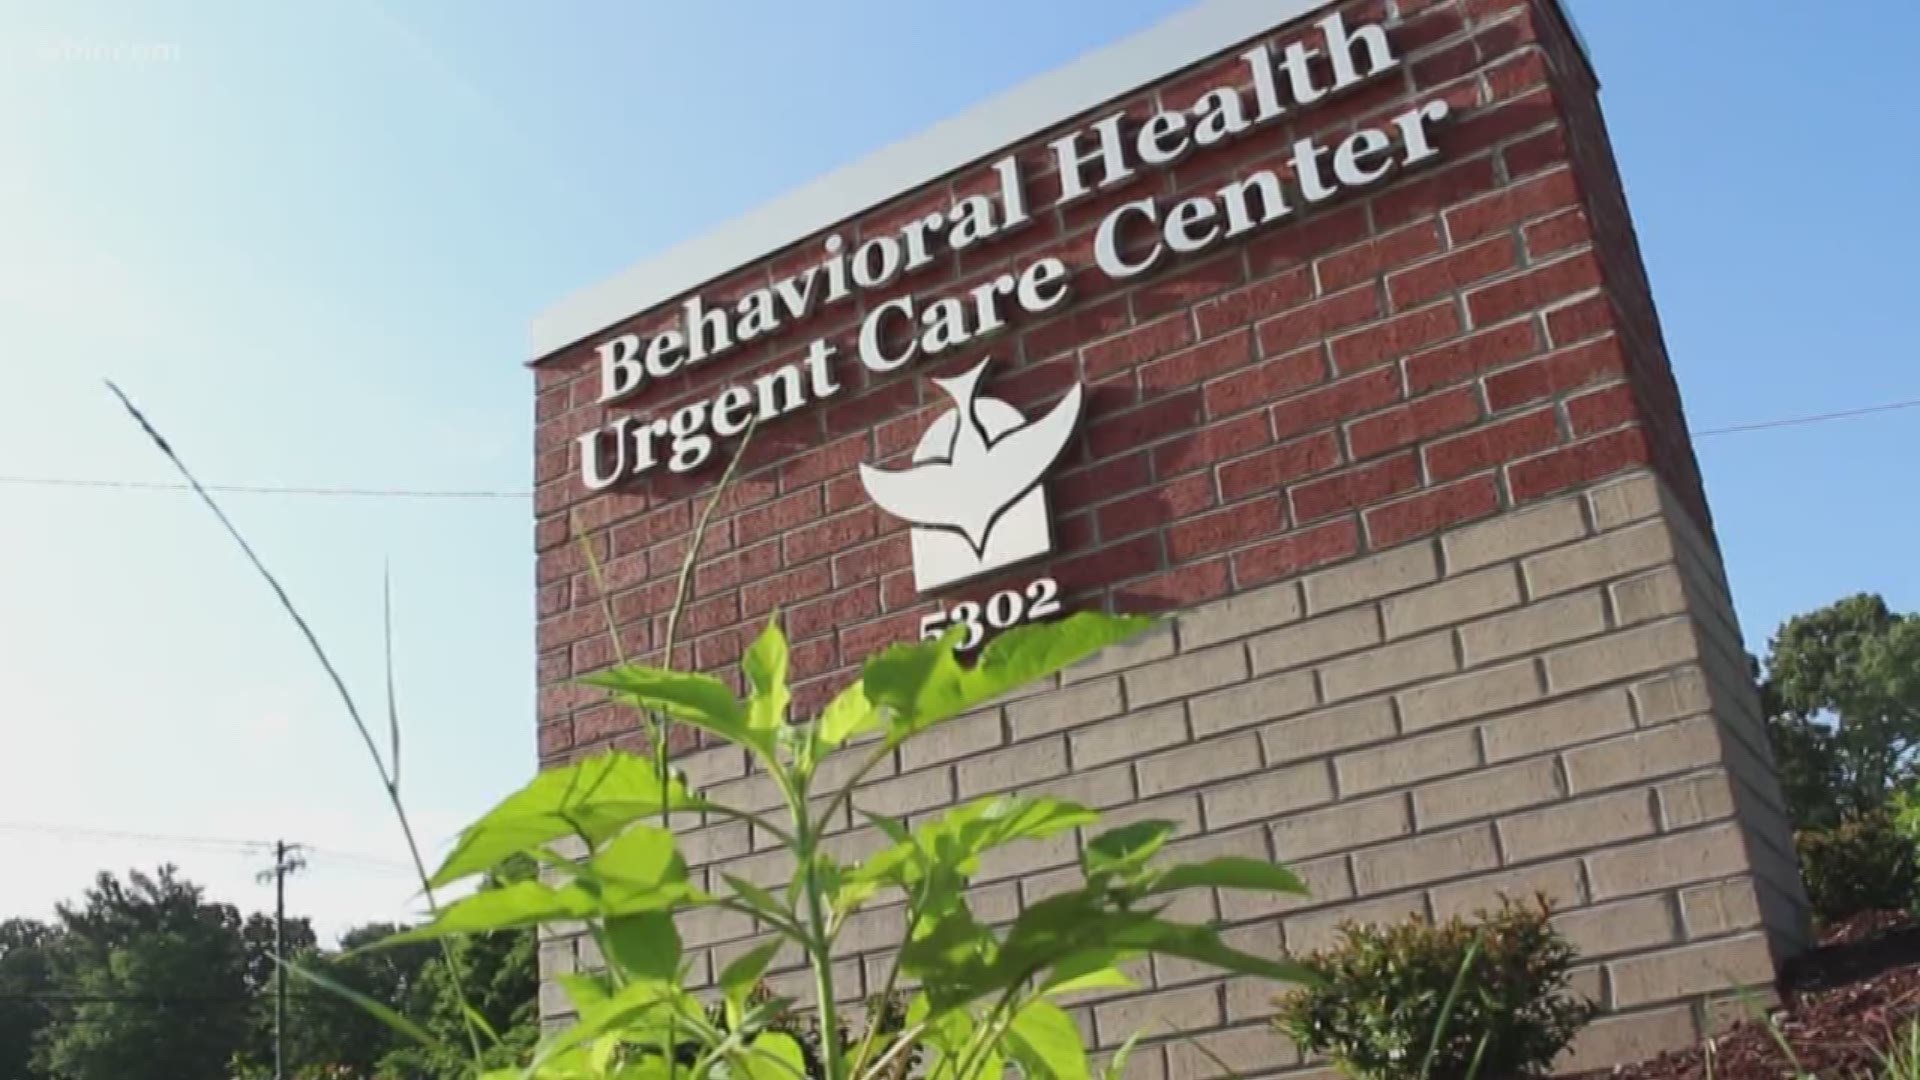 Dozens of defendants have used the new Behavioral Health Urgent Care Center since it opened months ago. May 25, 2018